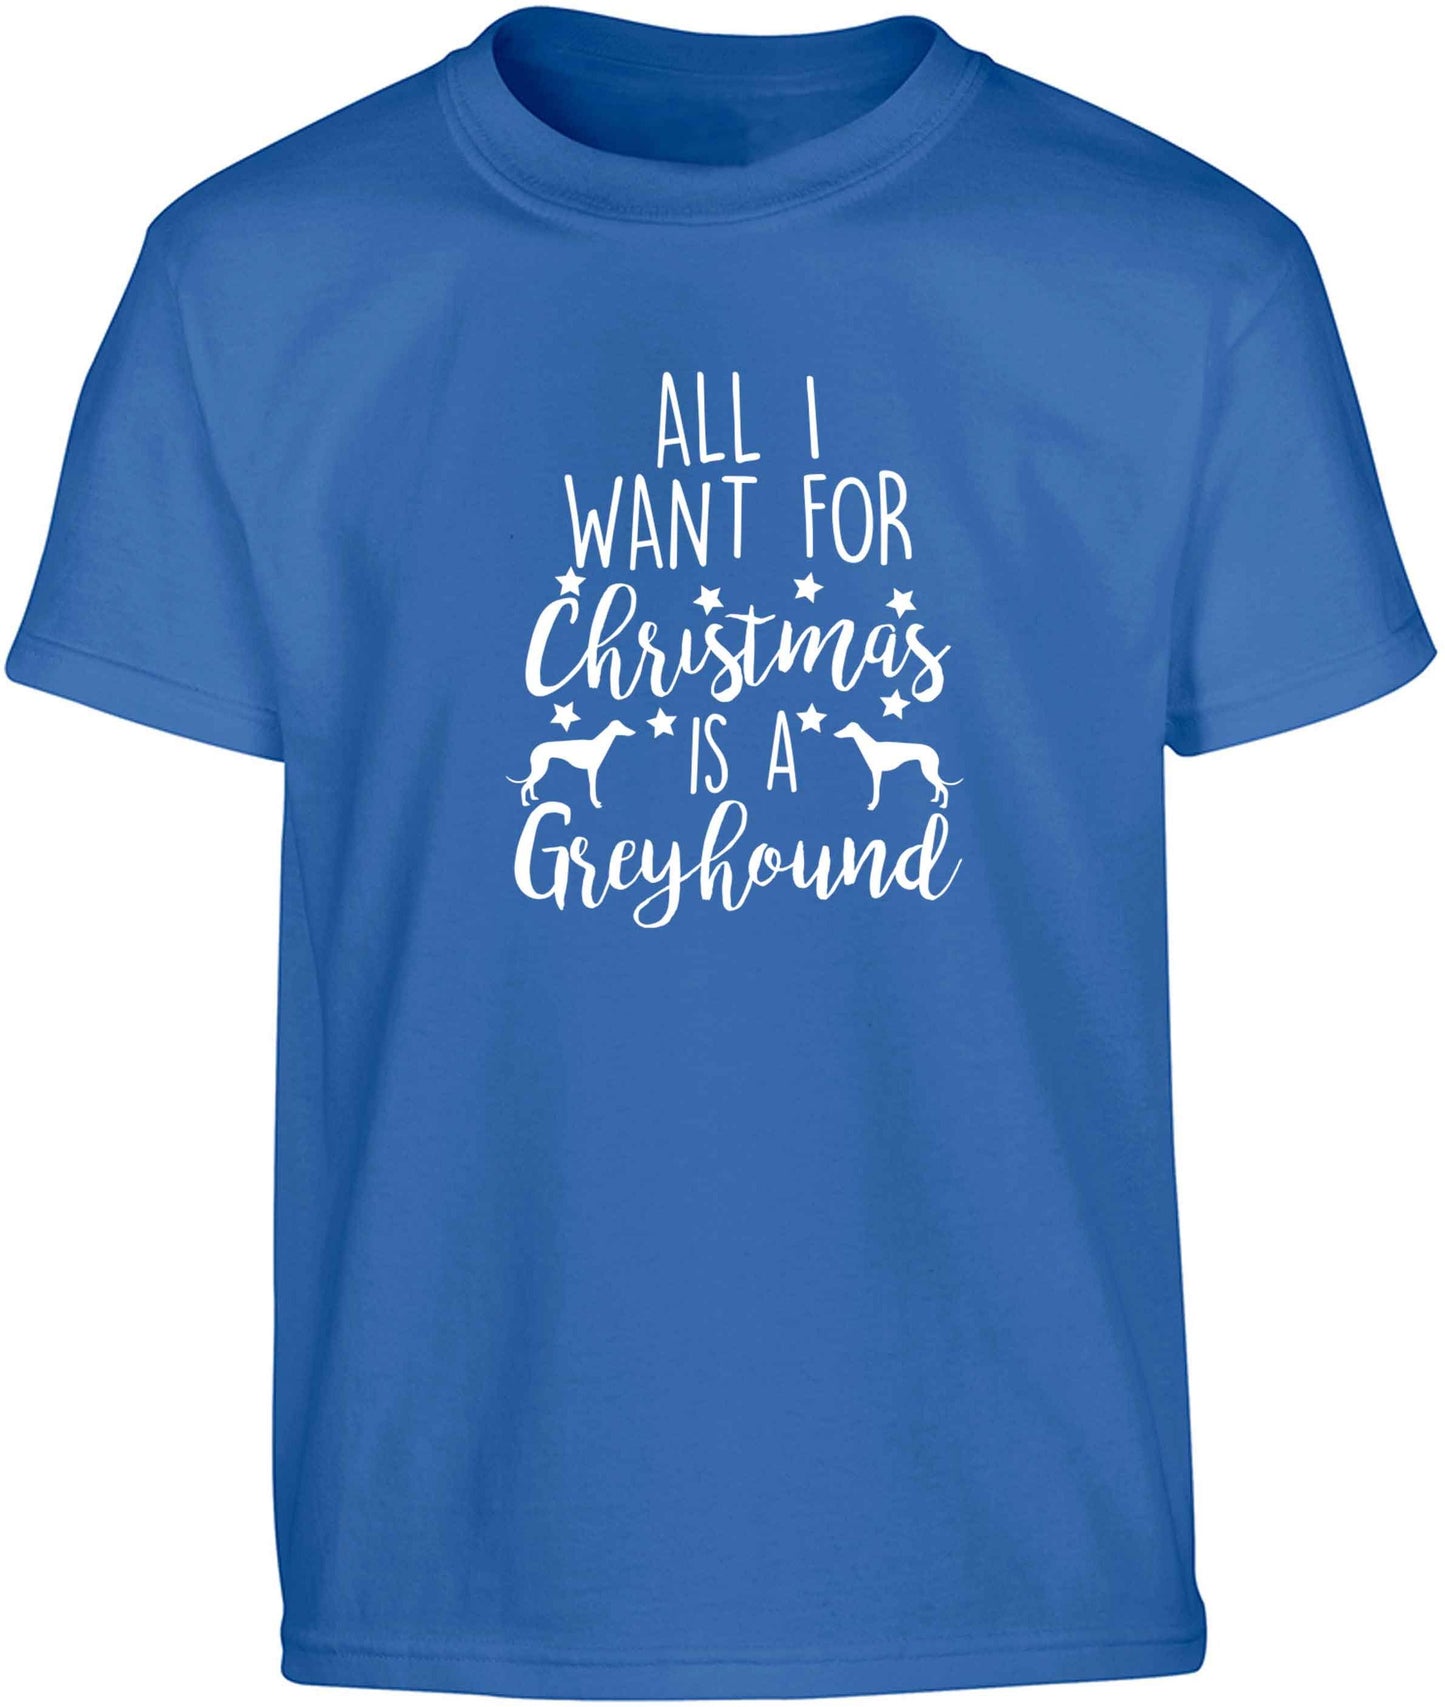 All I want for Christmas is a greyhound Children's blue Tshirt 12-13 Years